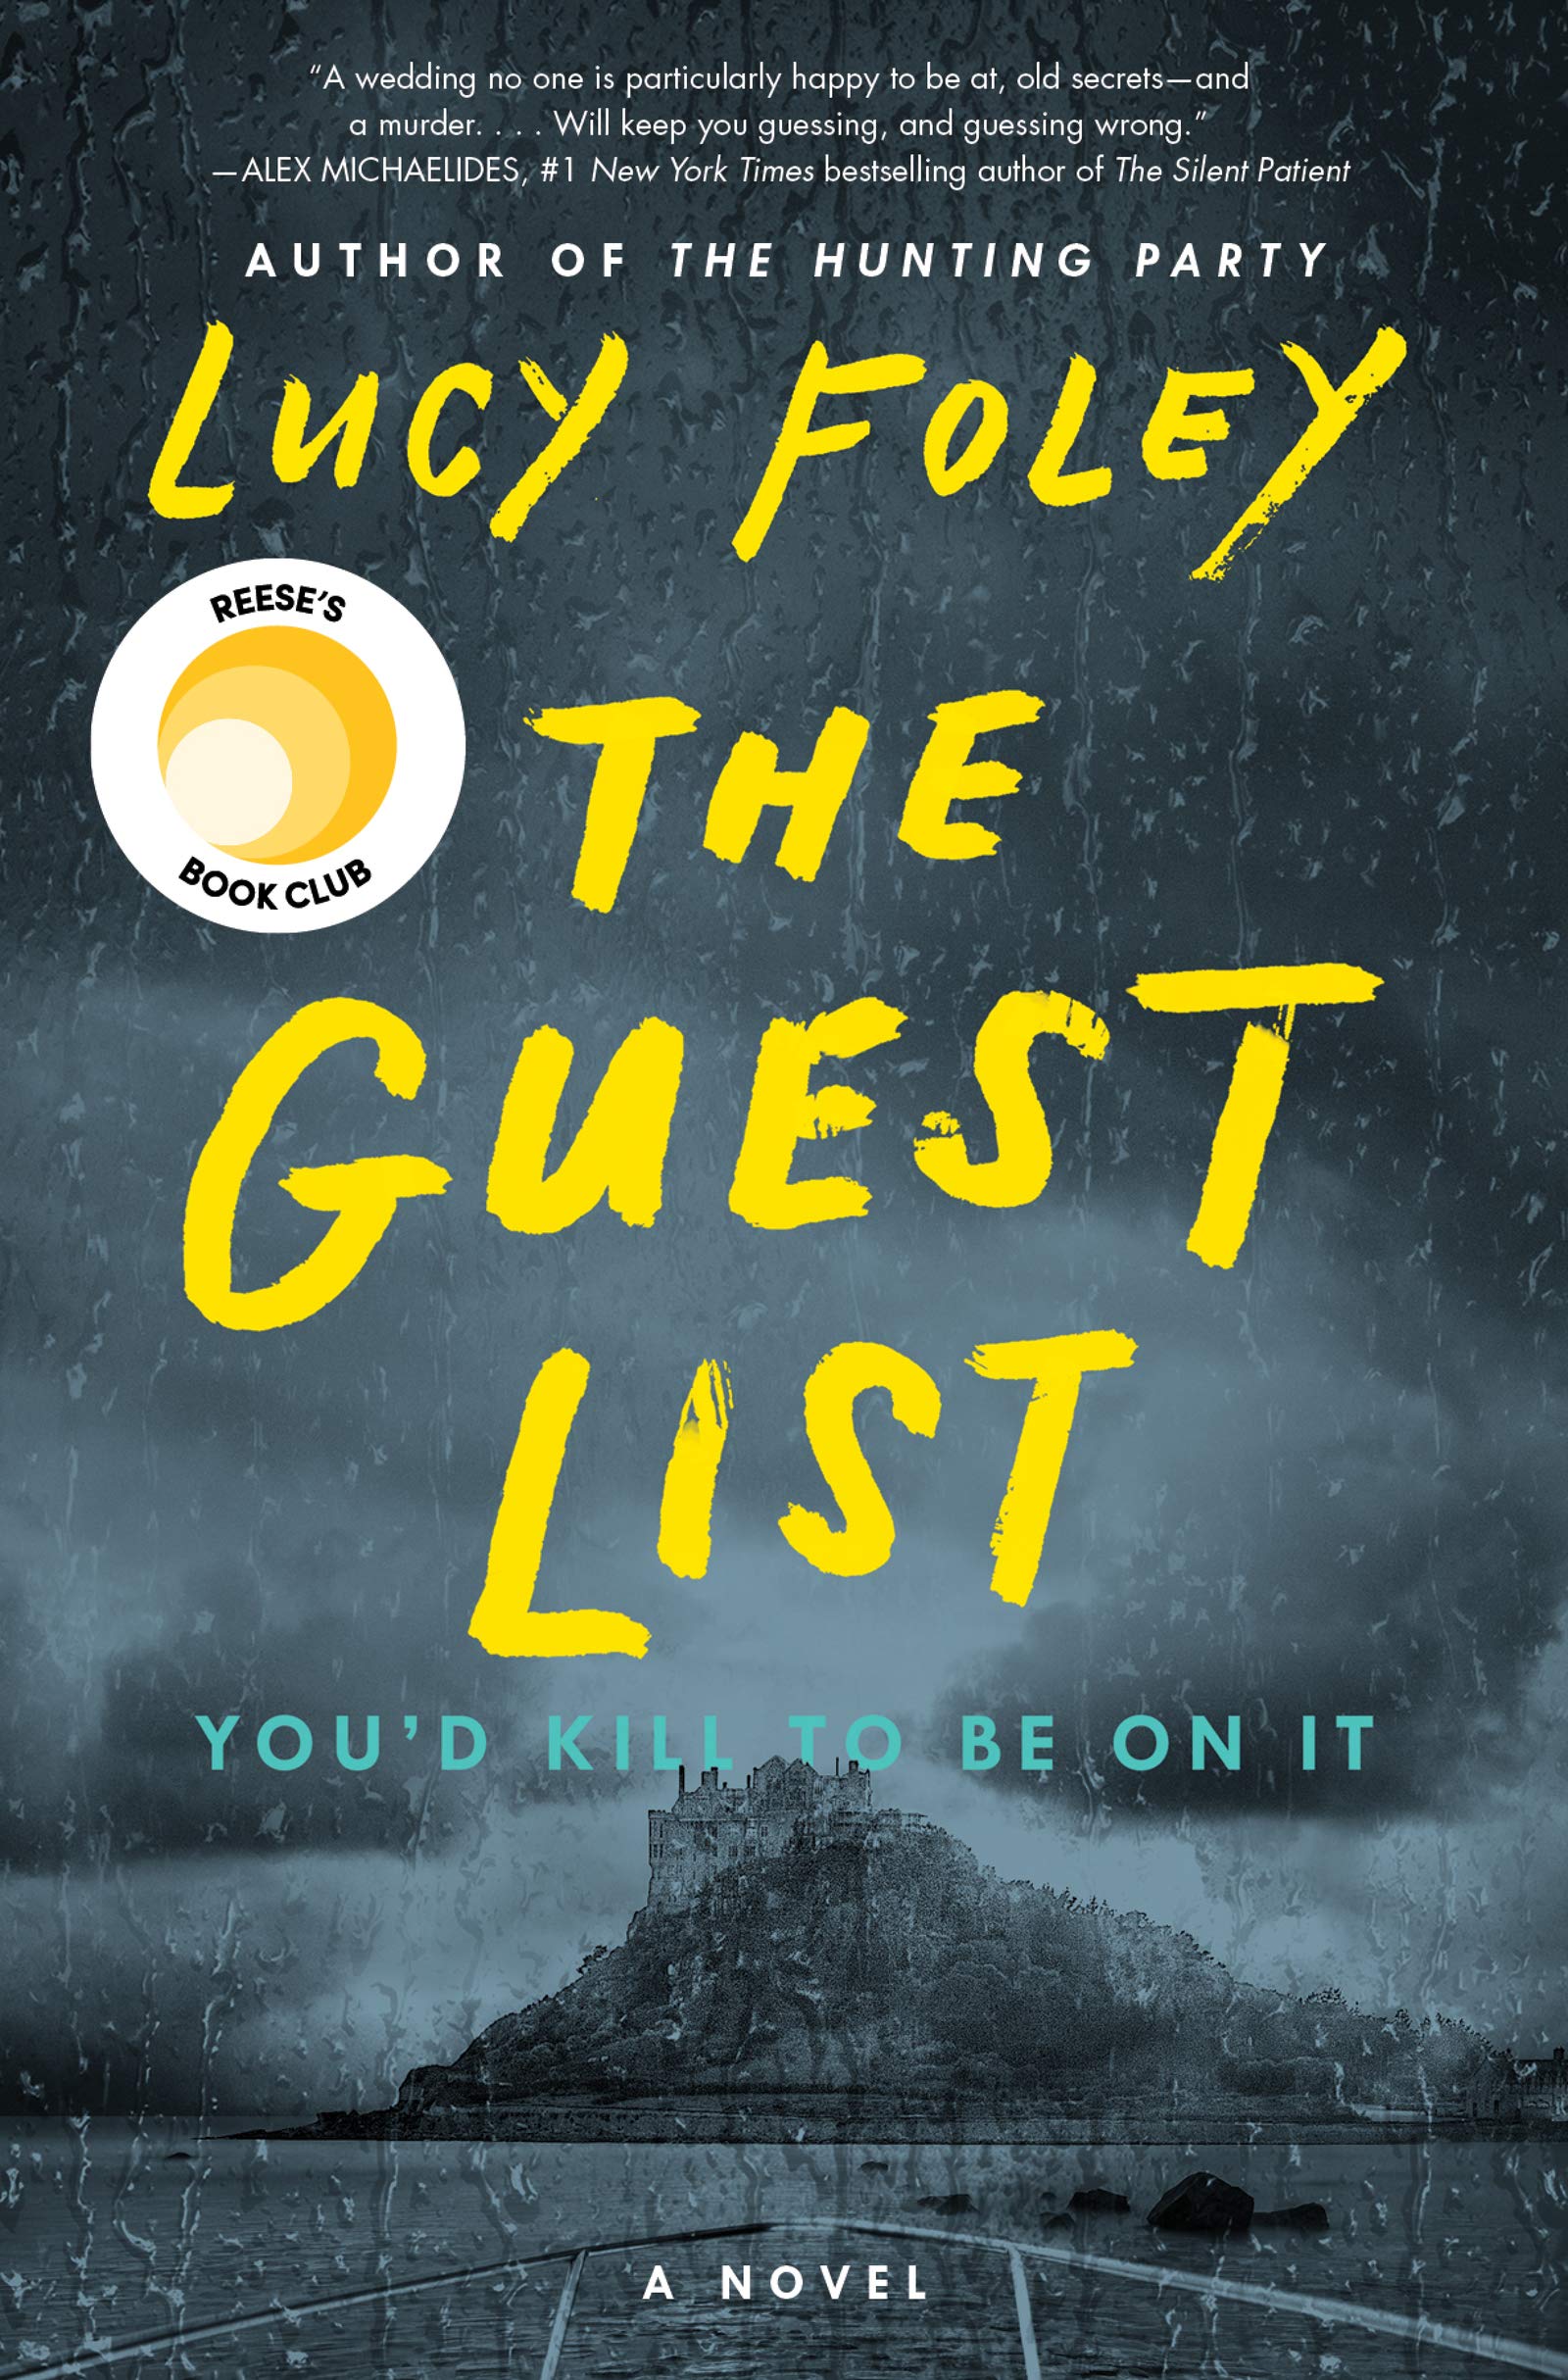 Book cover for "The Guest List," by Lucy Foley